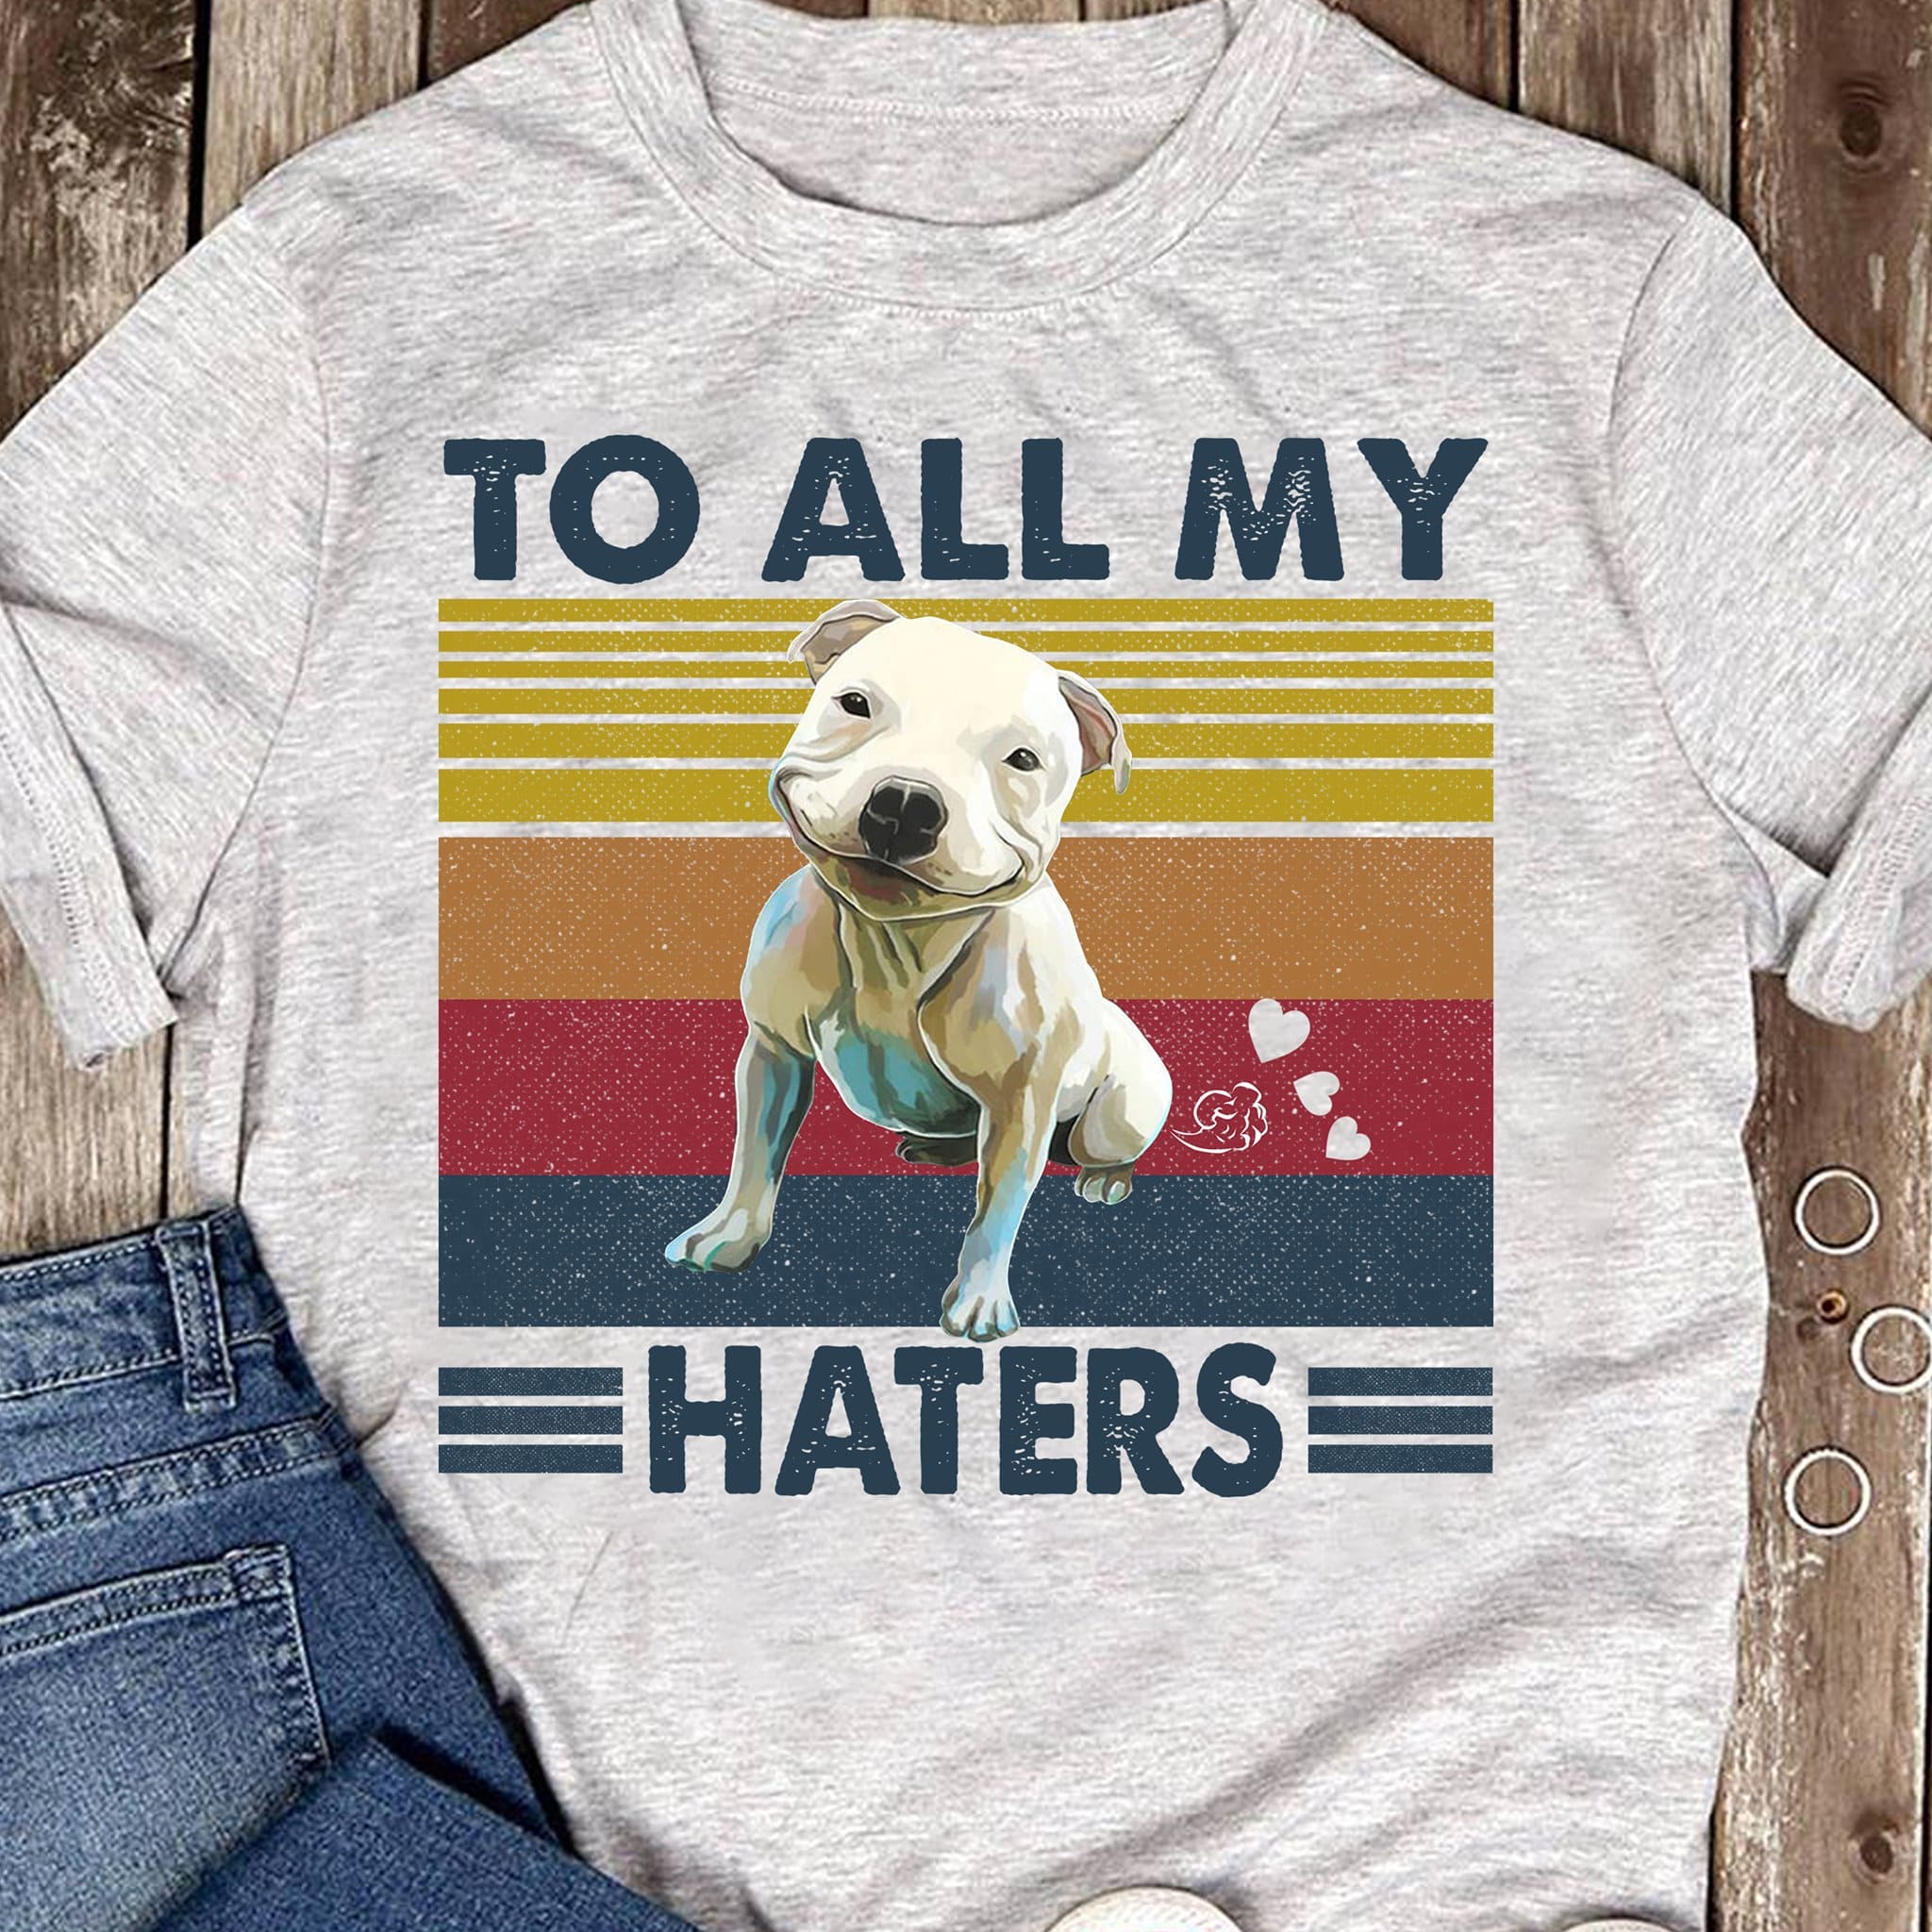 To all my haters - Cute white Frenchie dog, white Frenchie graphic T-shirt